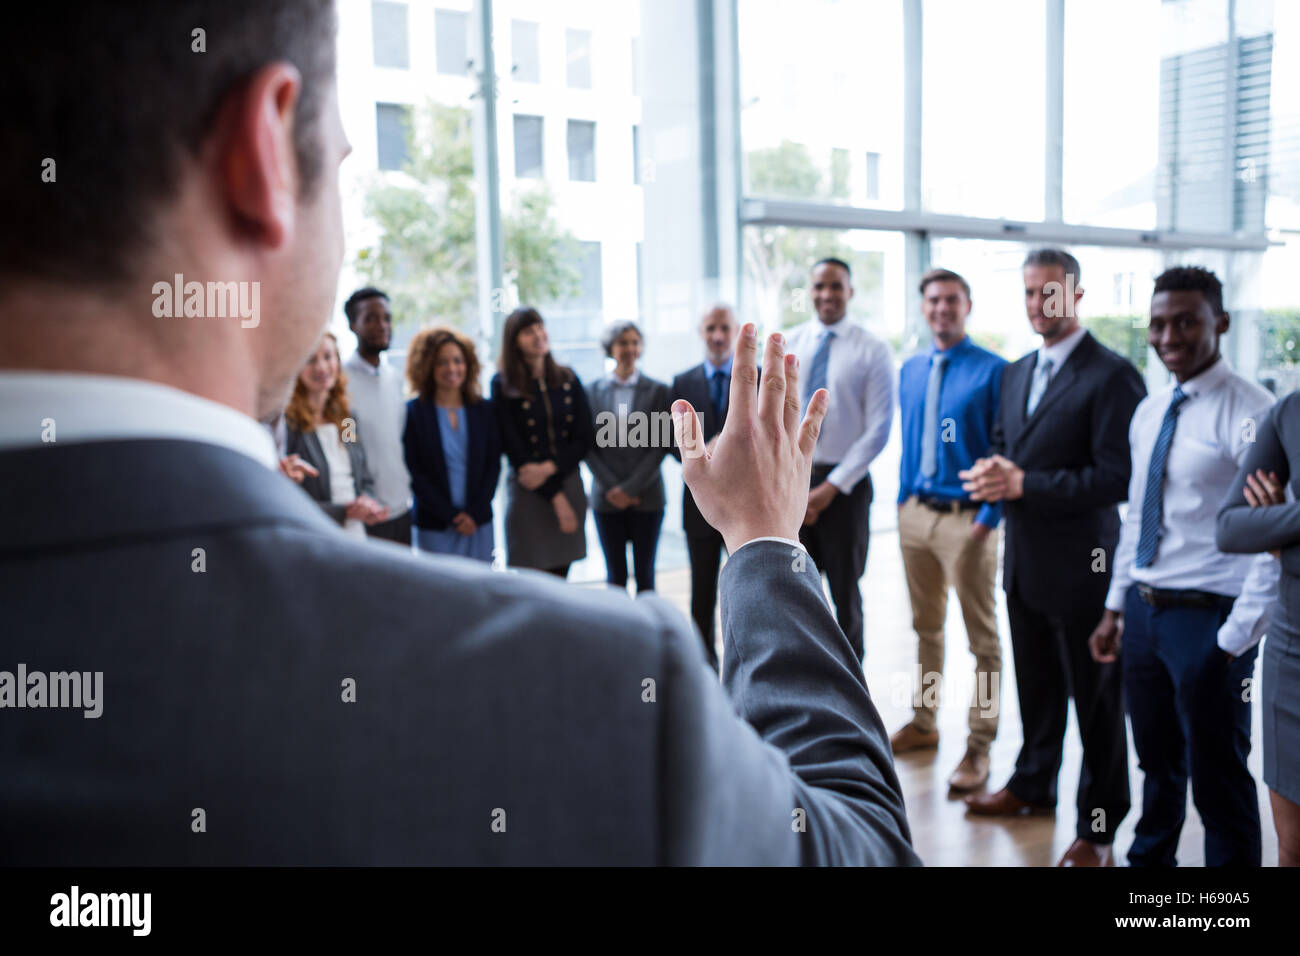 Businessman interacting with colleagues Stock Photo